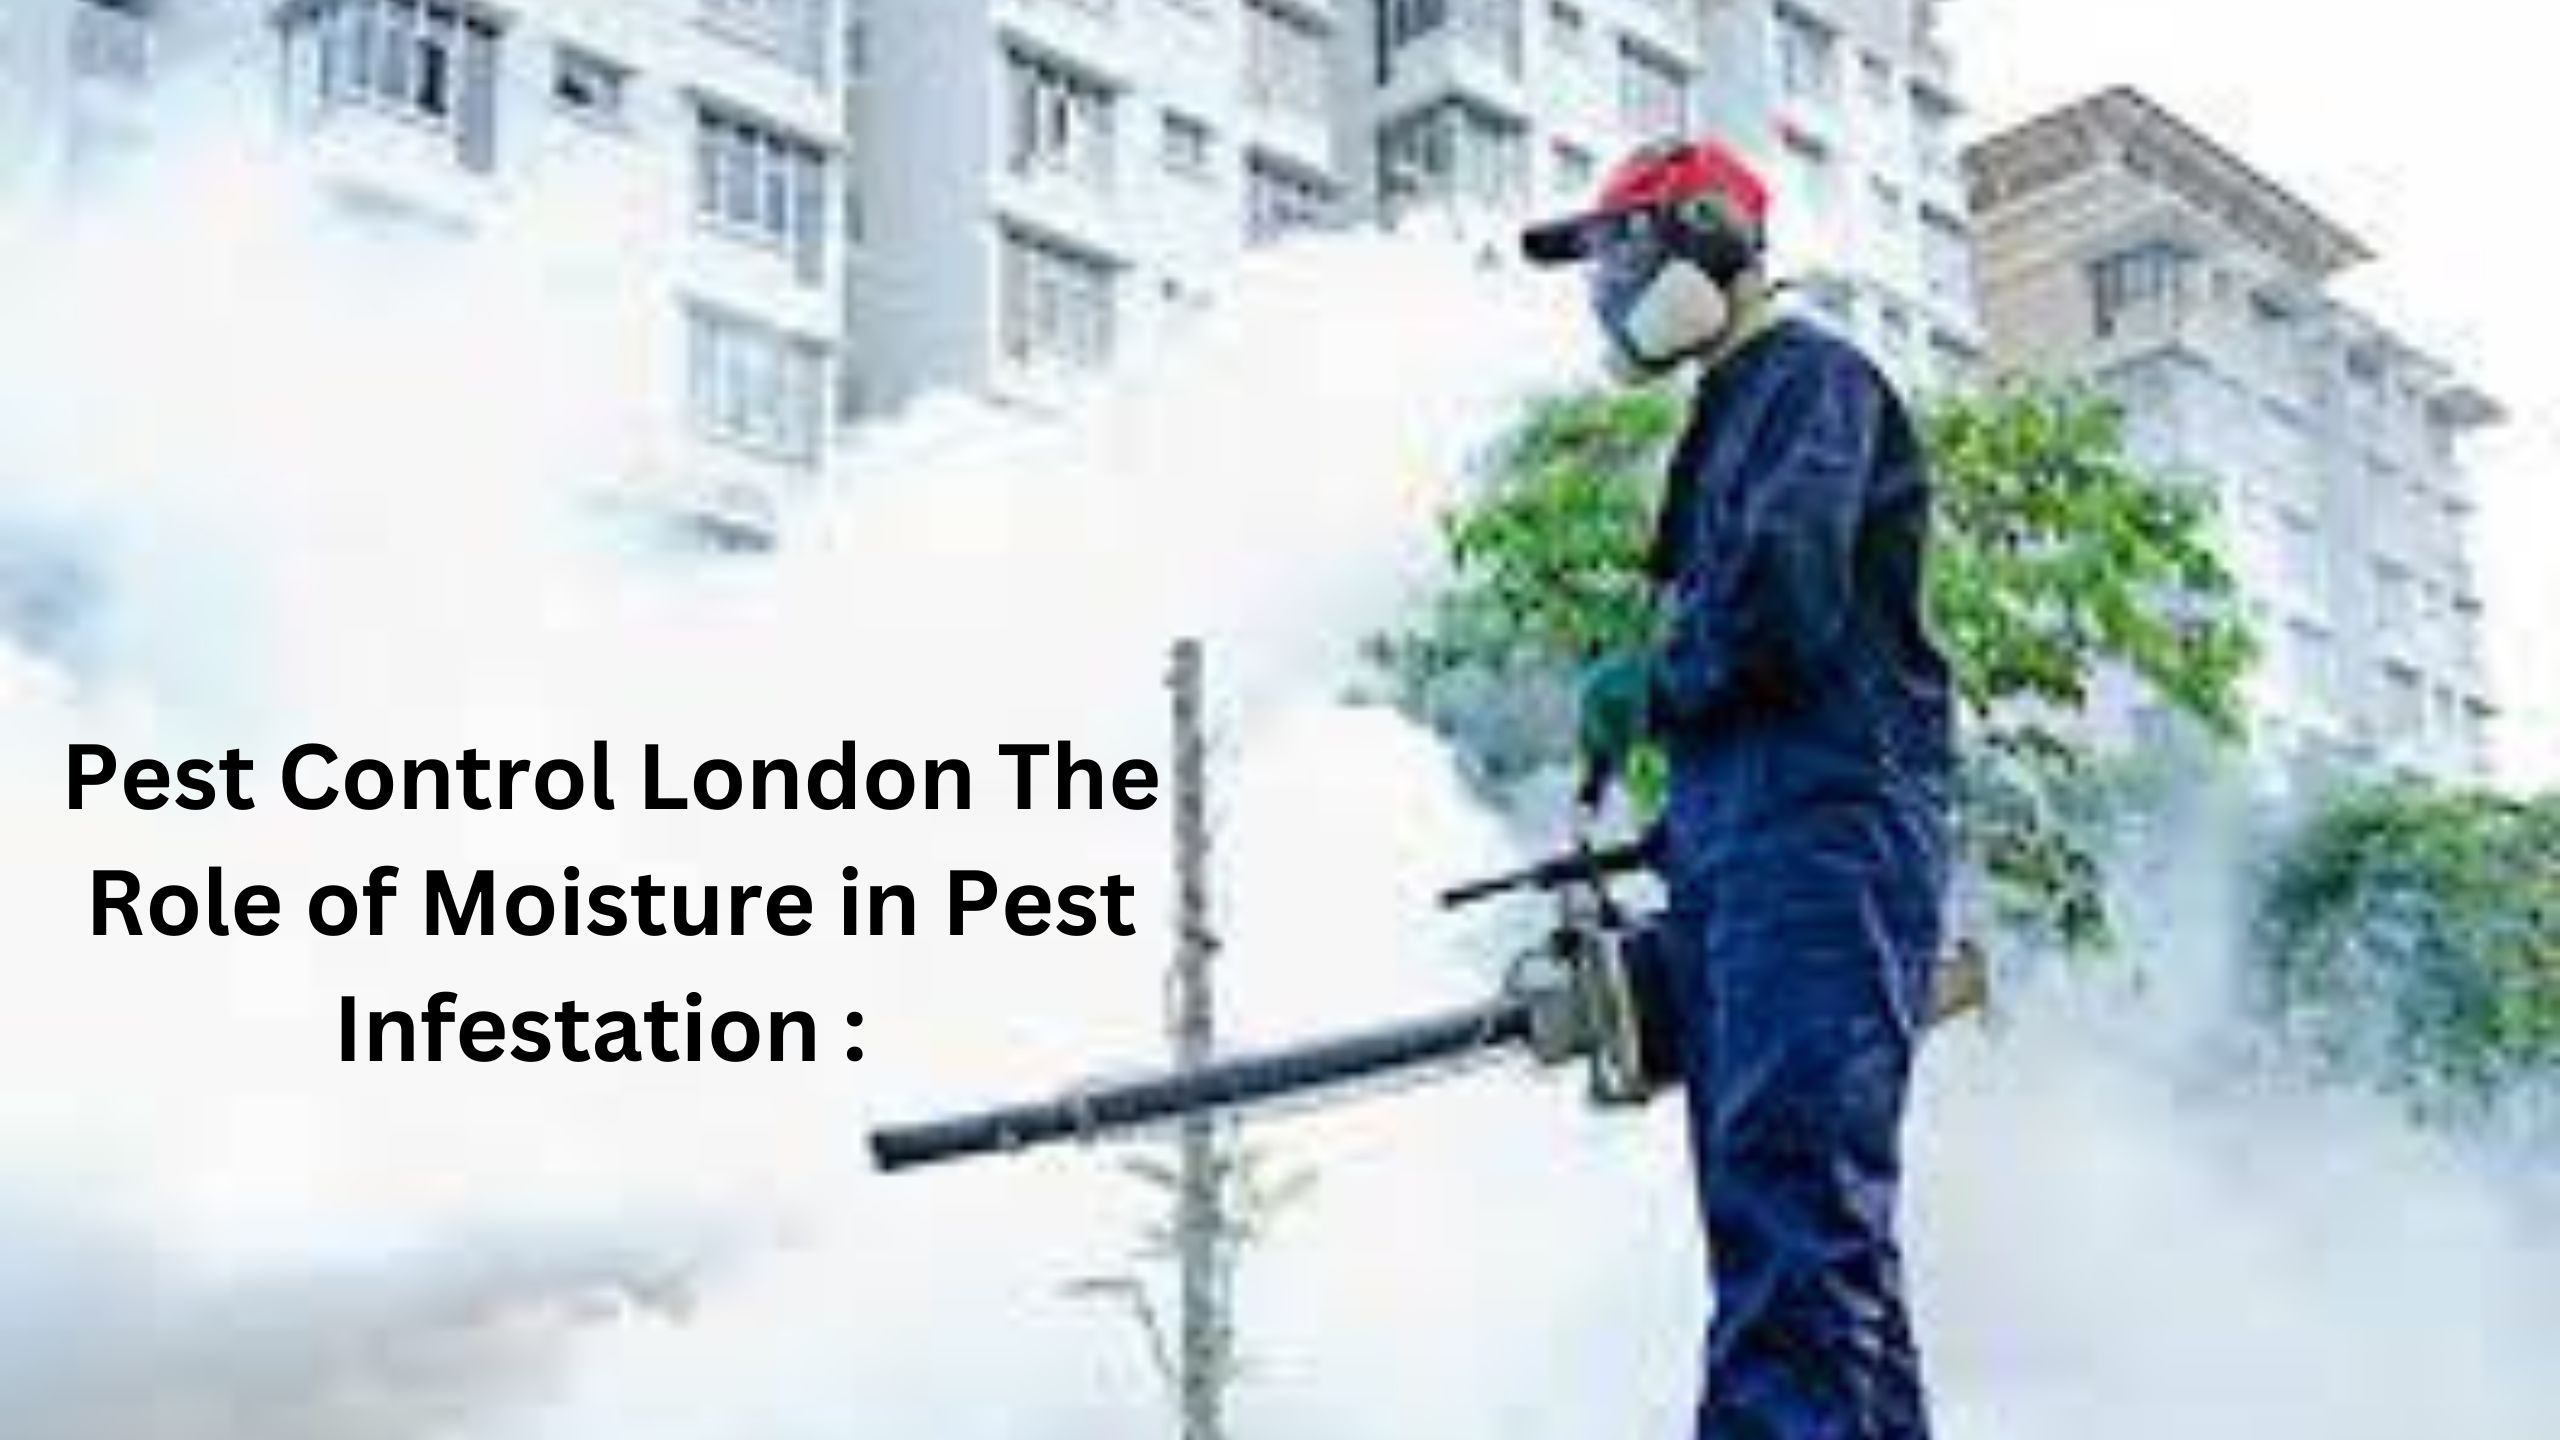 Pest Control London The Role of Moisture in Pest Infestation